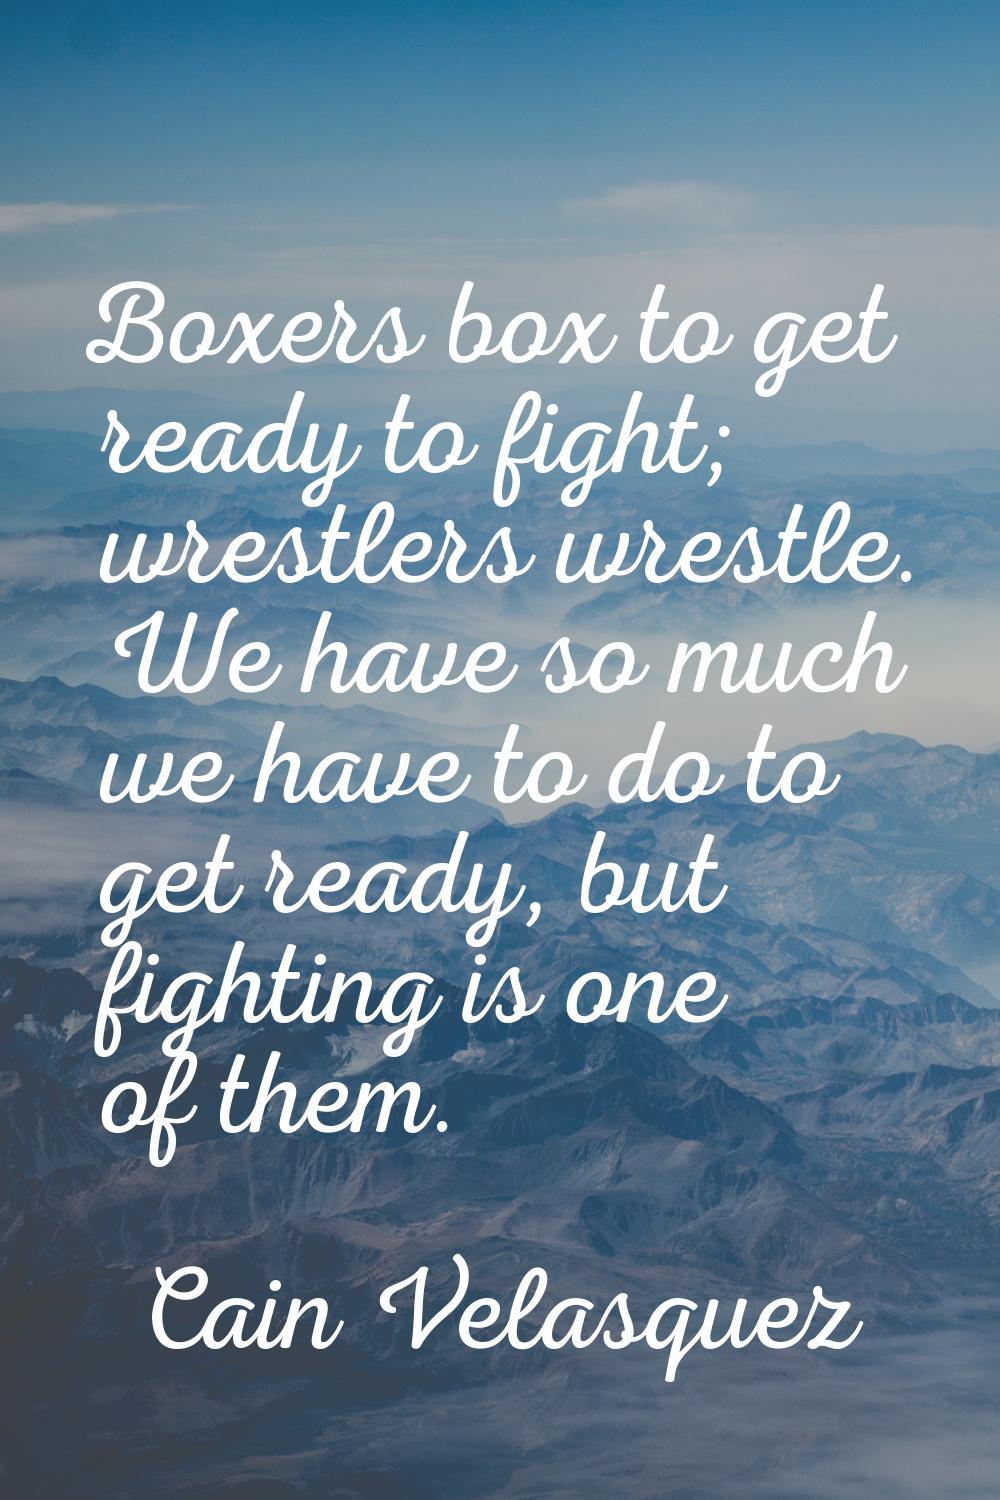 Boxers box to get ready to fight; wrestlers wrestle. We have so much we have to do to get ready, bu